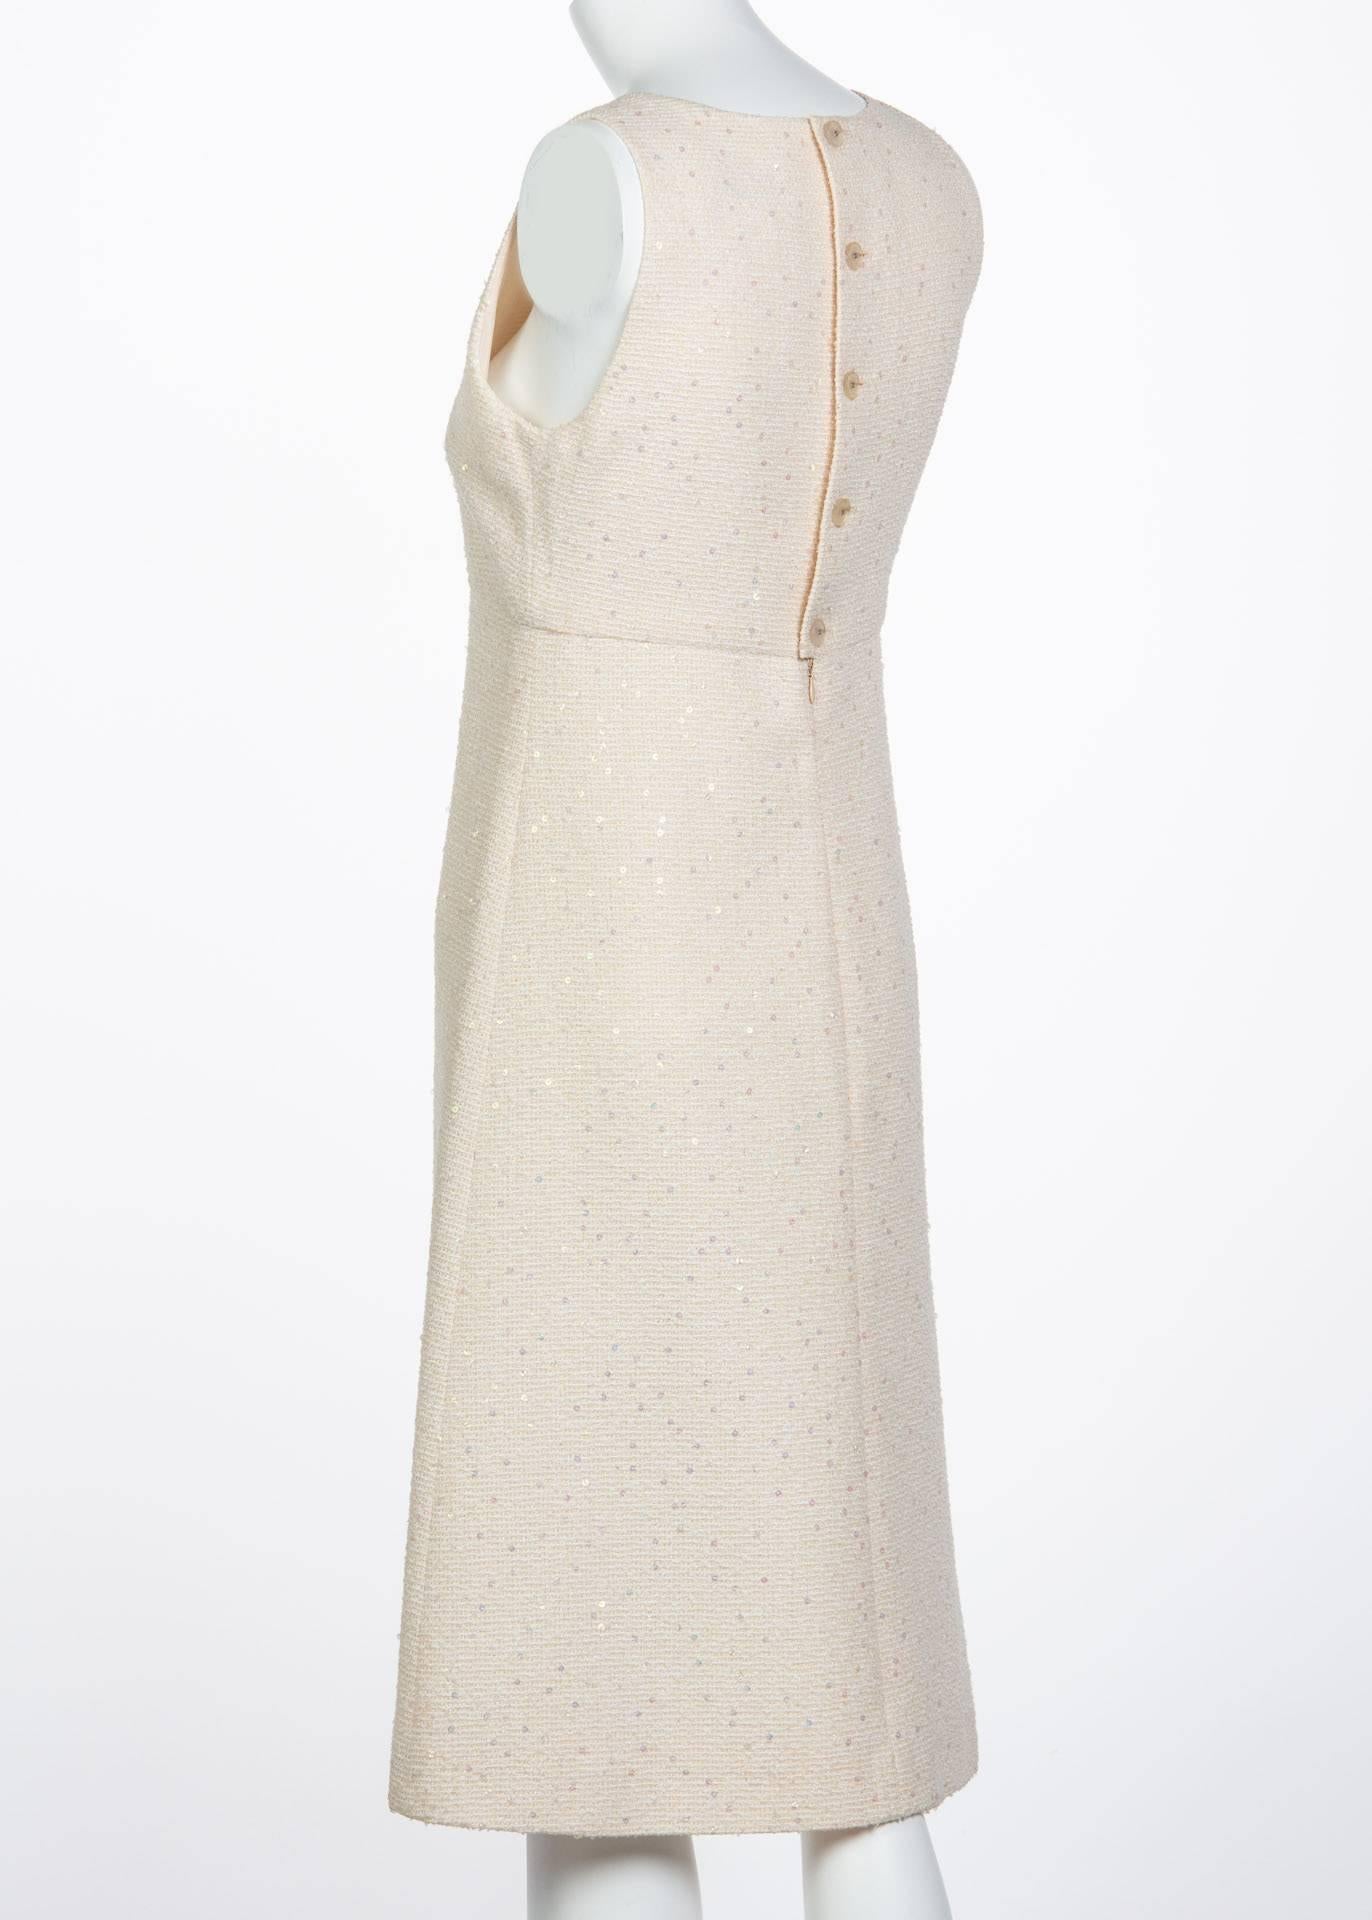 Chanel Sequence Boucle Pale Pink Sleeveless Dress, 2000  2